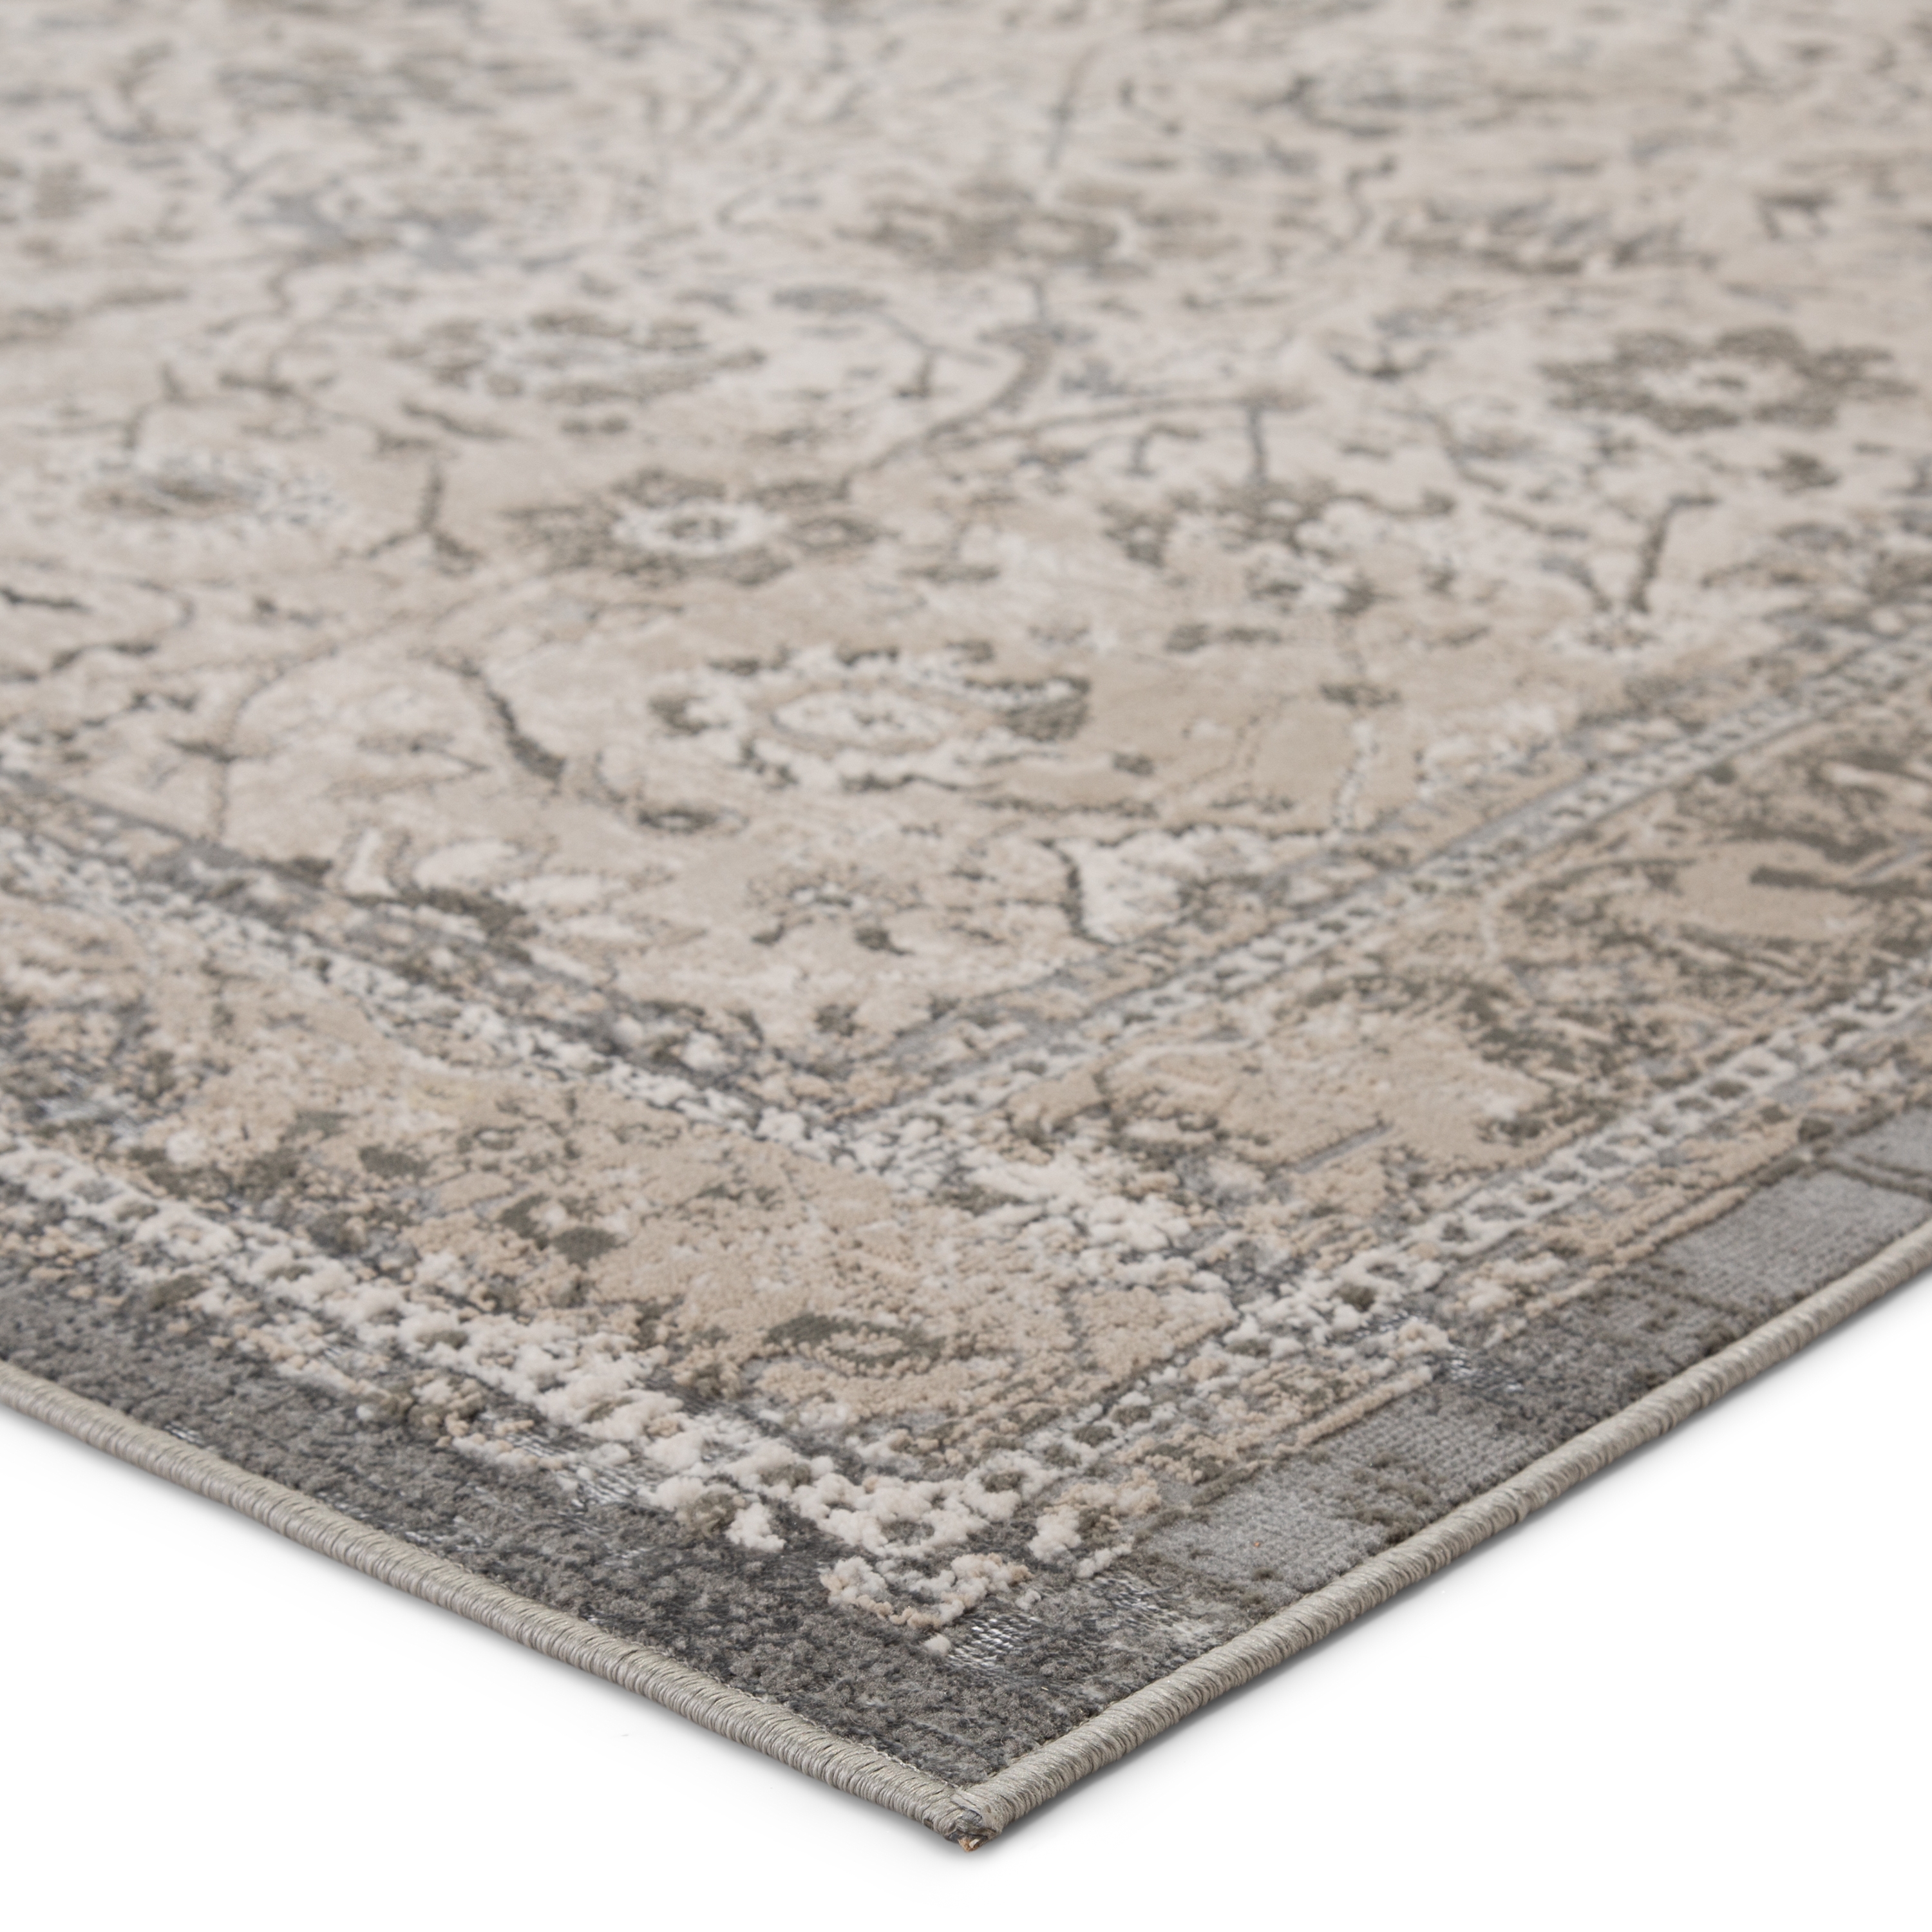 Vibe by Odel Oriental Gray/ White Area Rug (7'10"X10'6") - Image 1